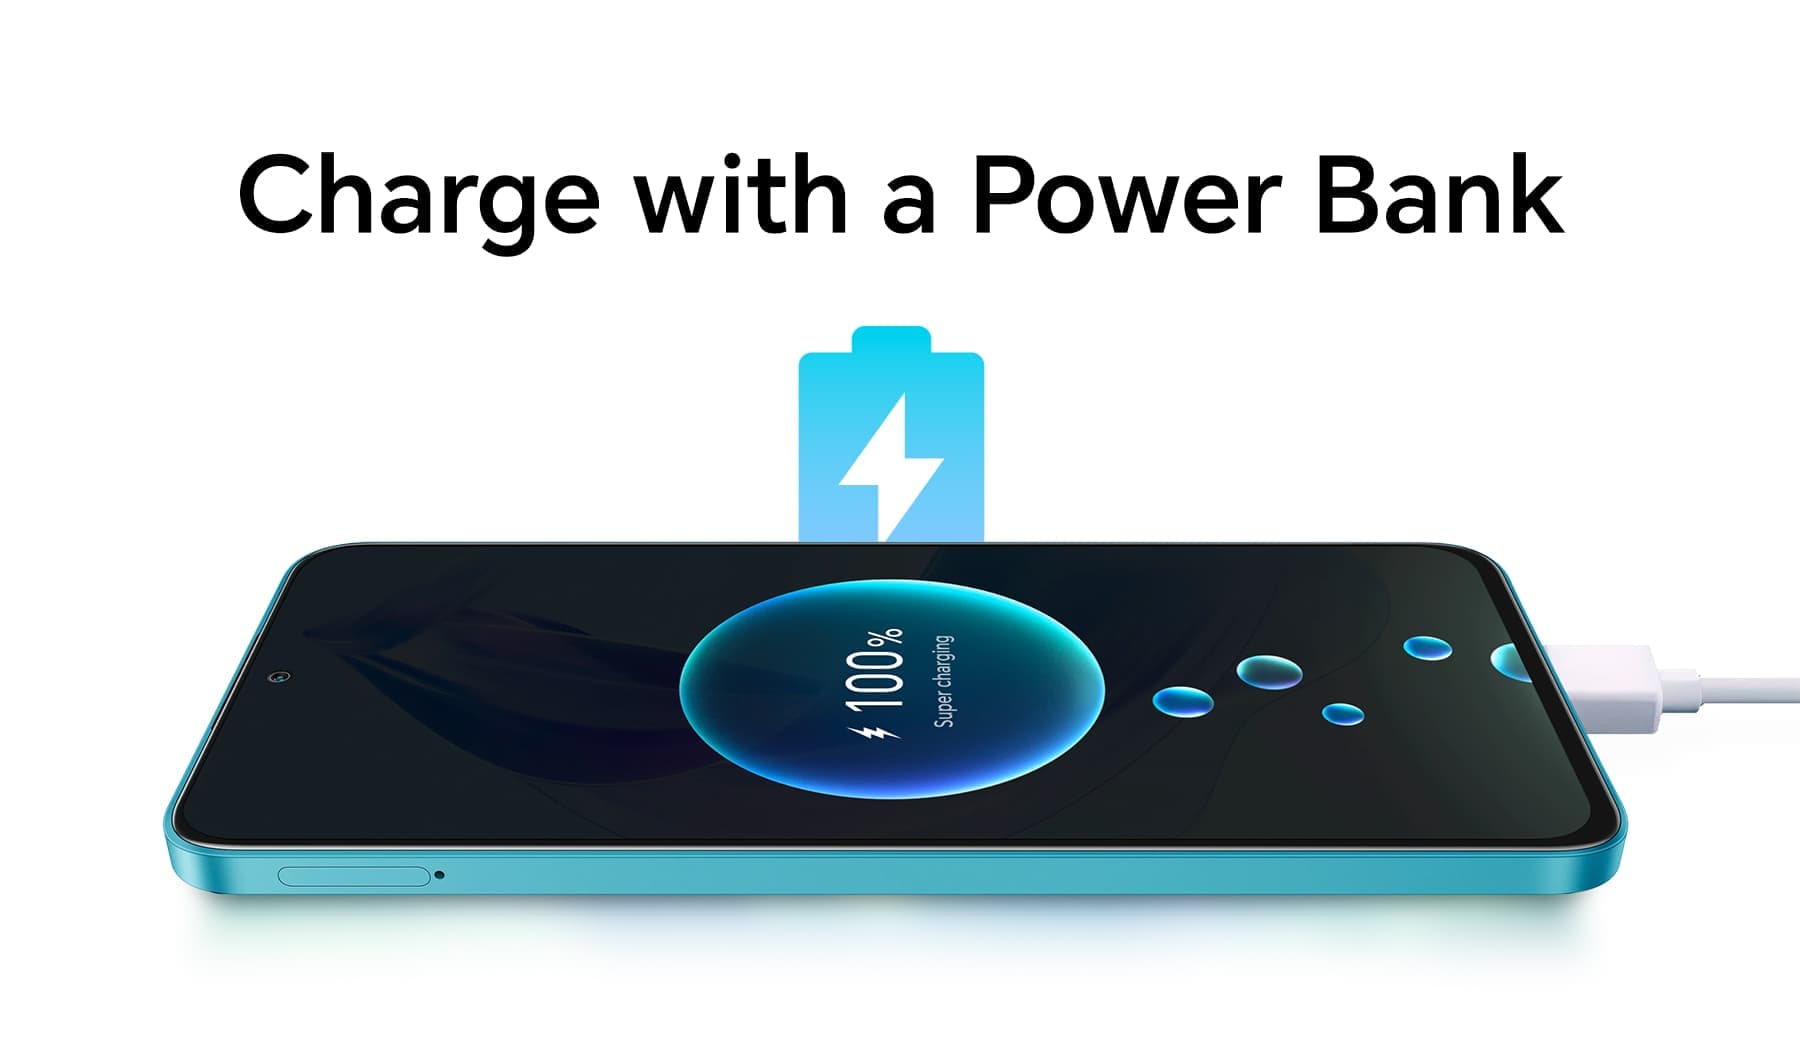 Charge with a Power Bank